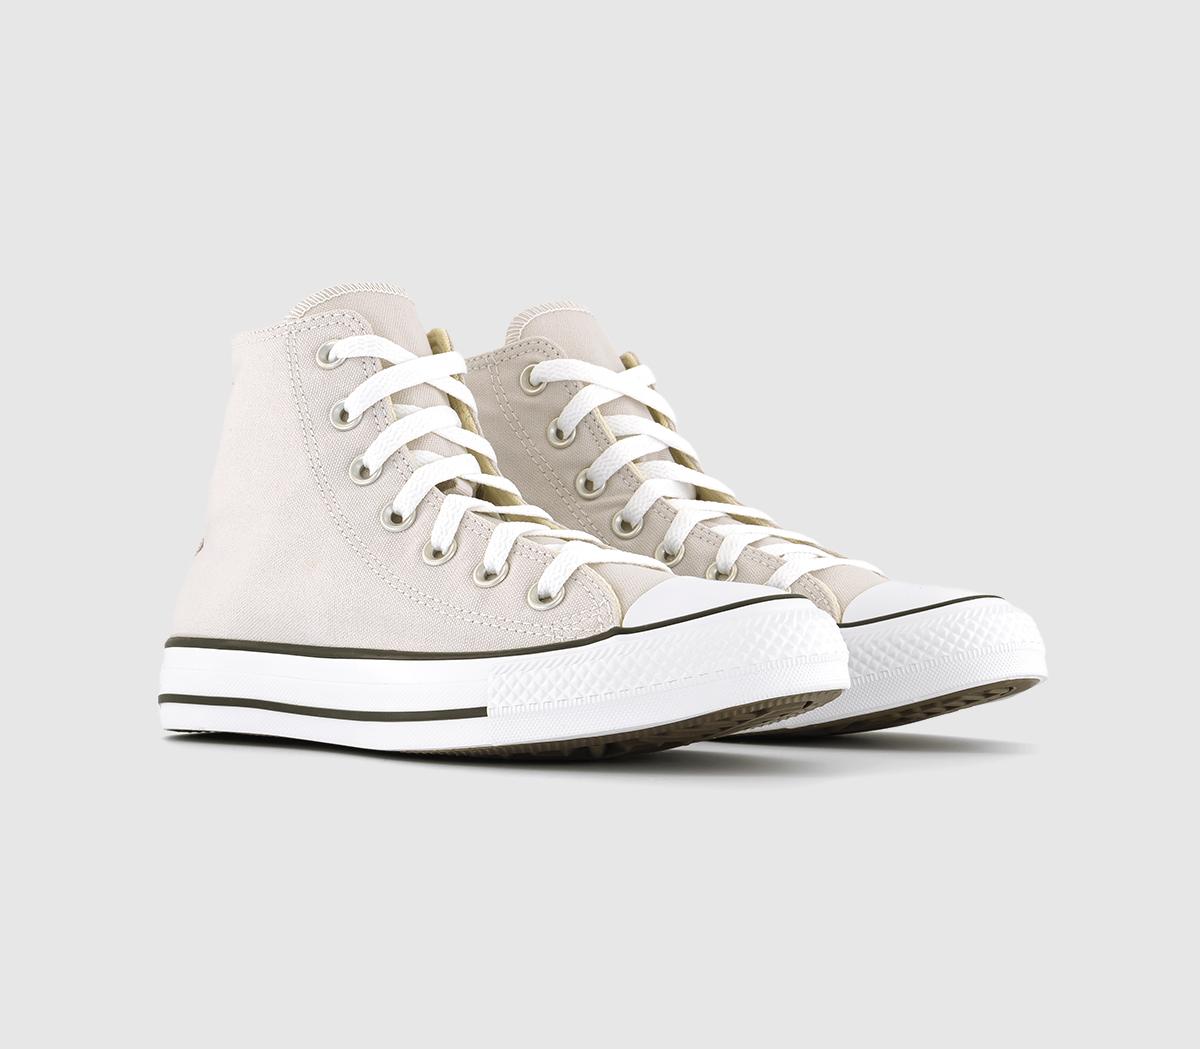 Converse All Star Hi Trainers Pale Putty White Black Natural, 11